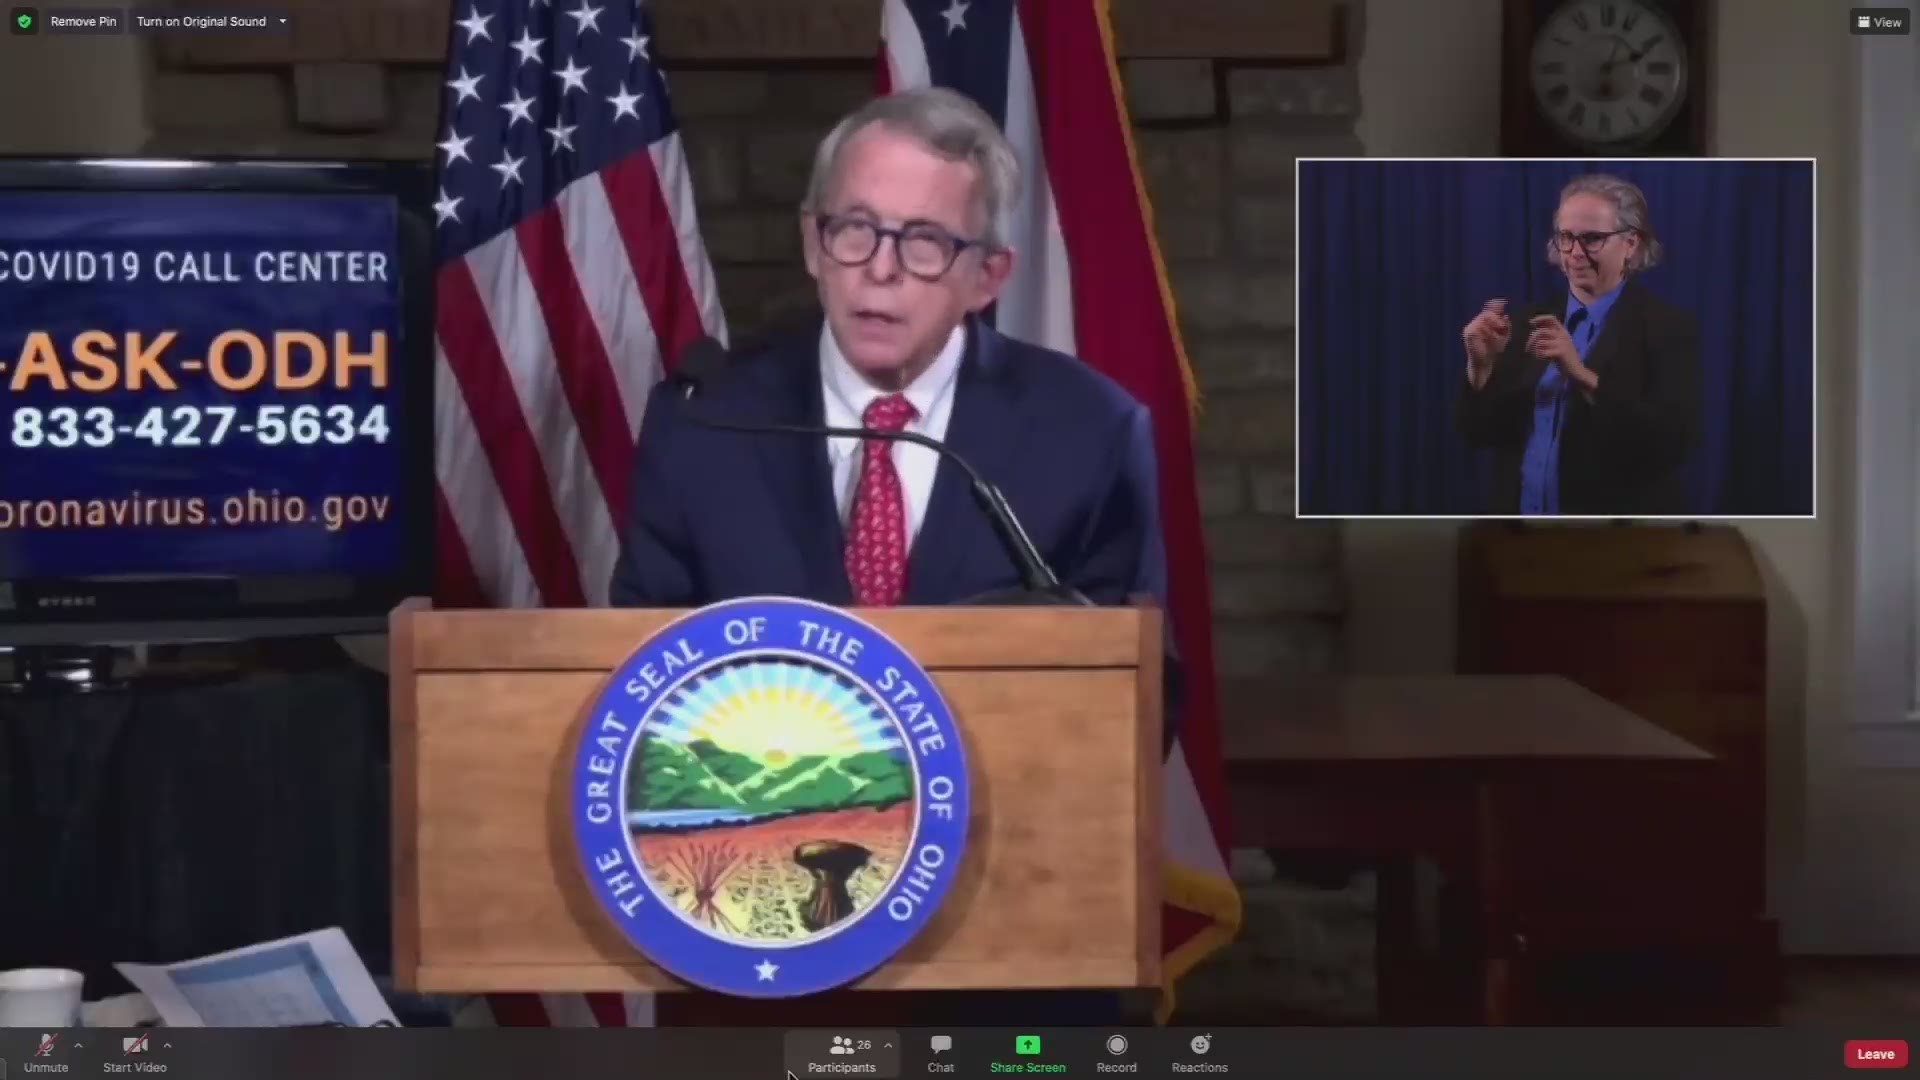 Ohio Governor Mike DeWine opened his press briefing on Thursday by discussing Tuesday's presidential debate in Cleveland.